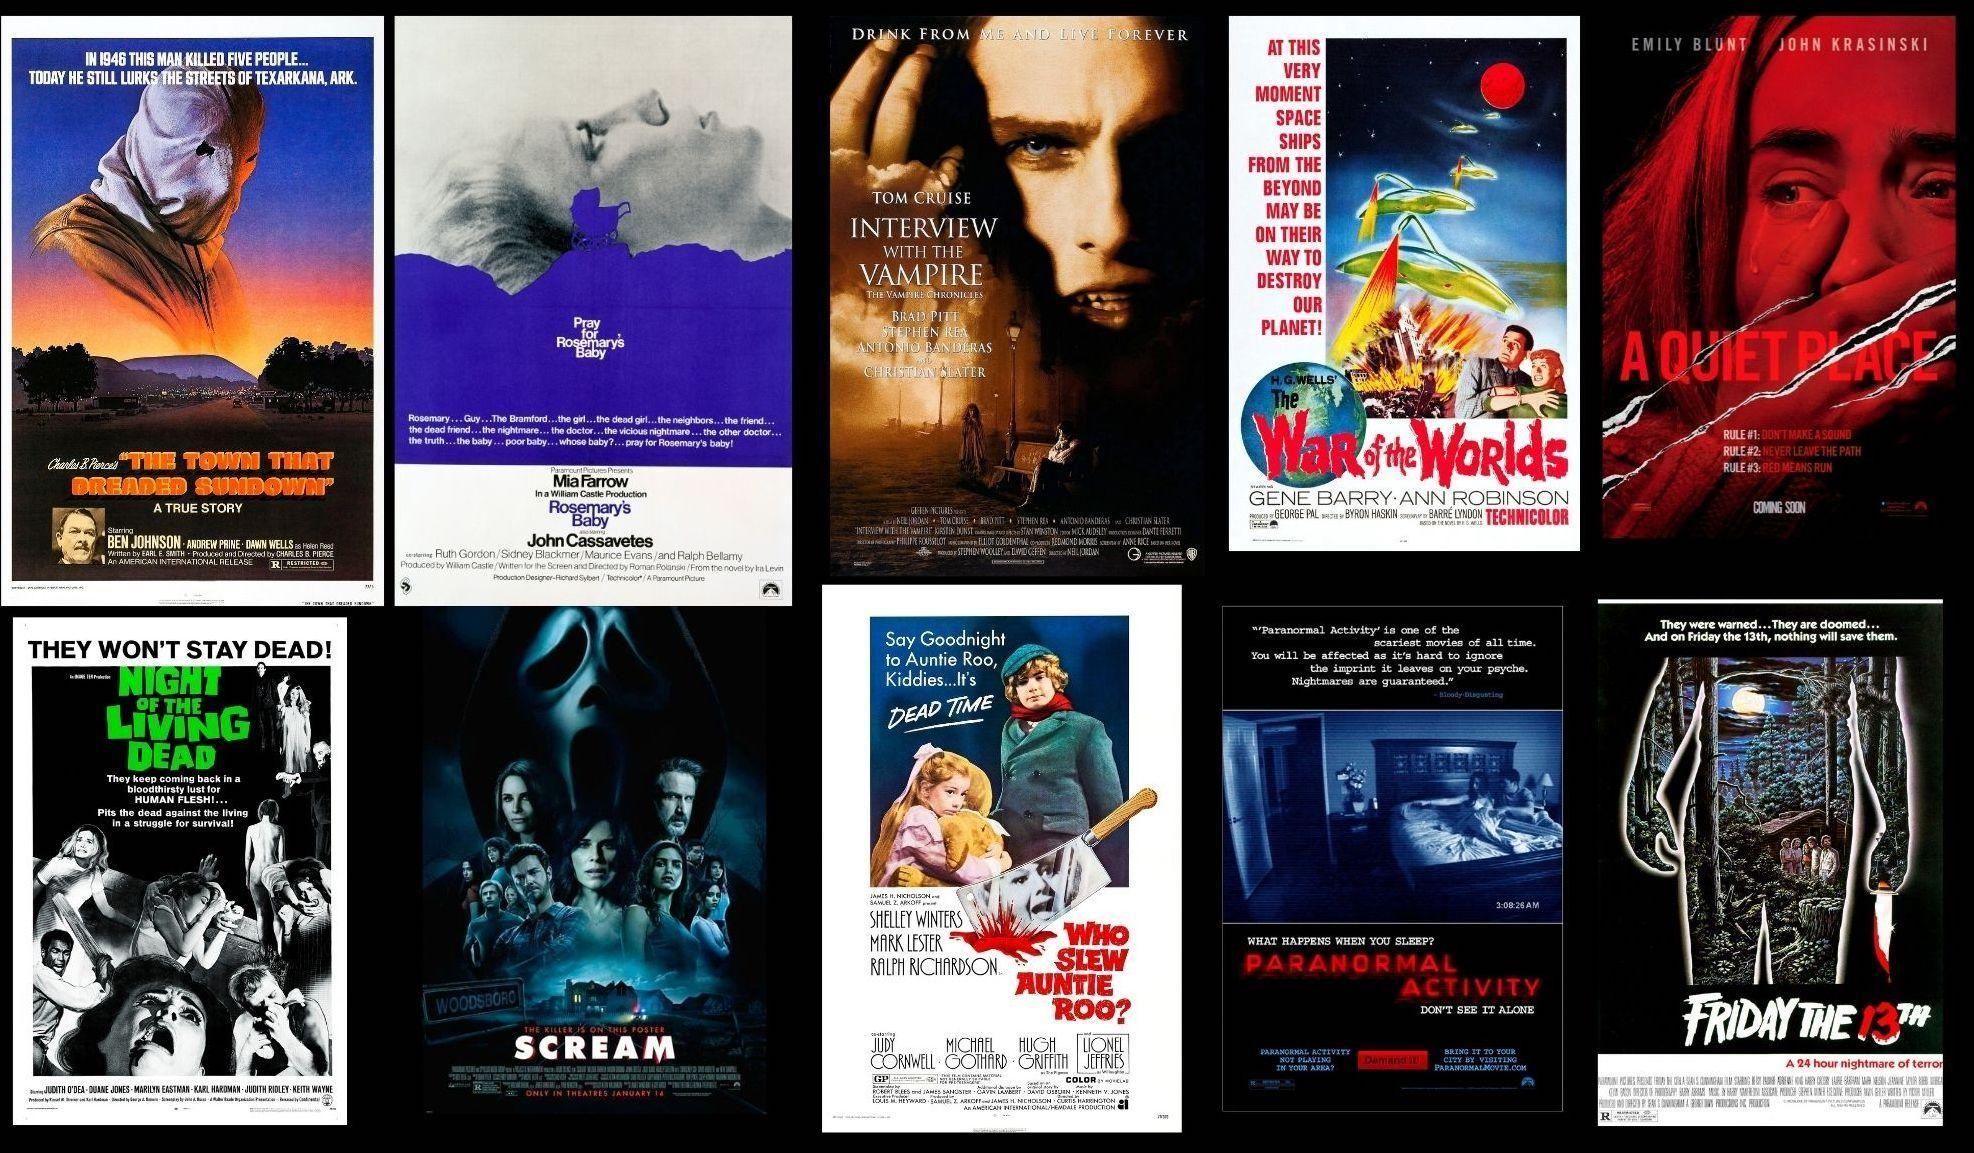 Thumbnail versions of ten promotional posters for scary movies available to watch on Paramount Plus.